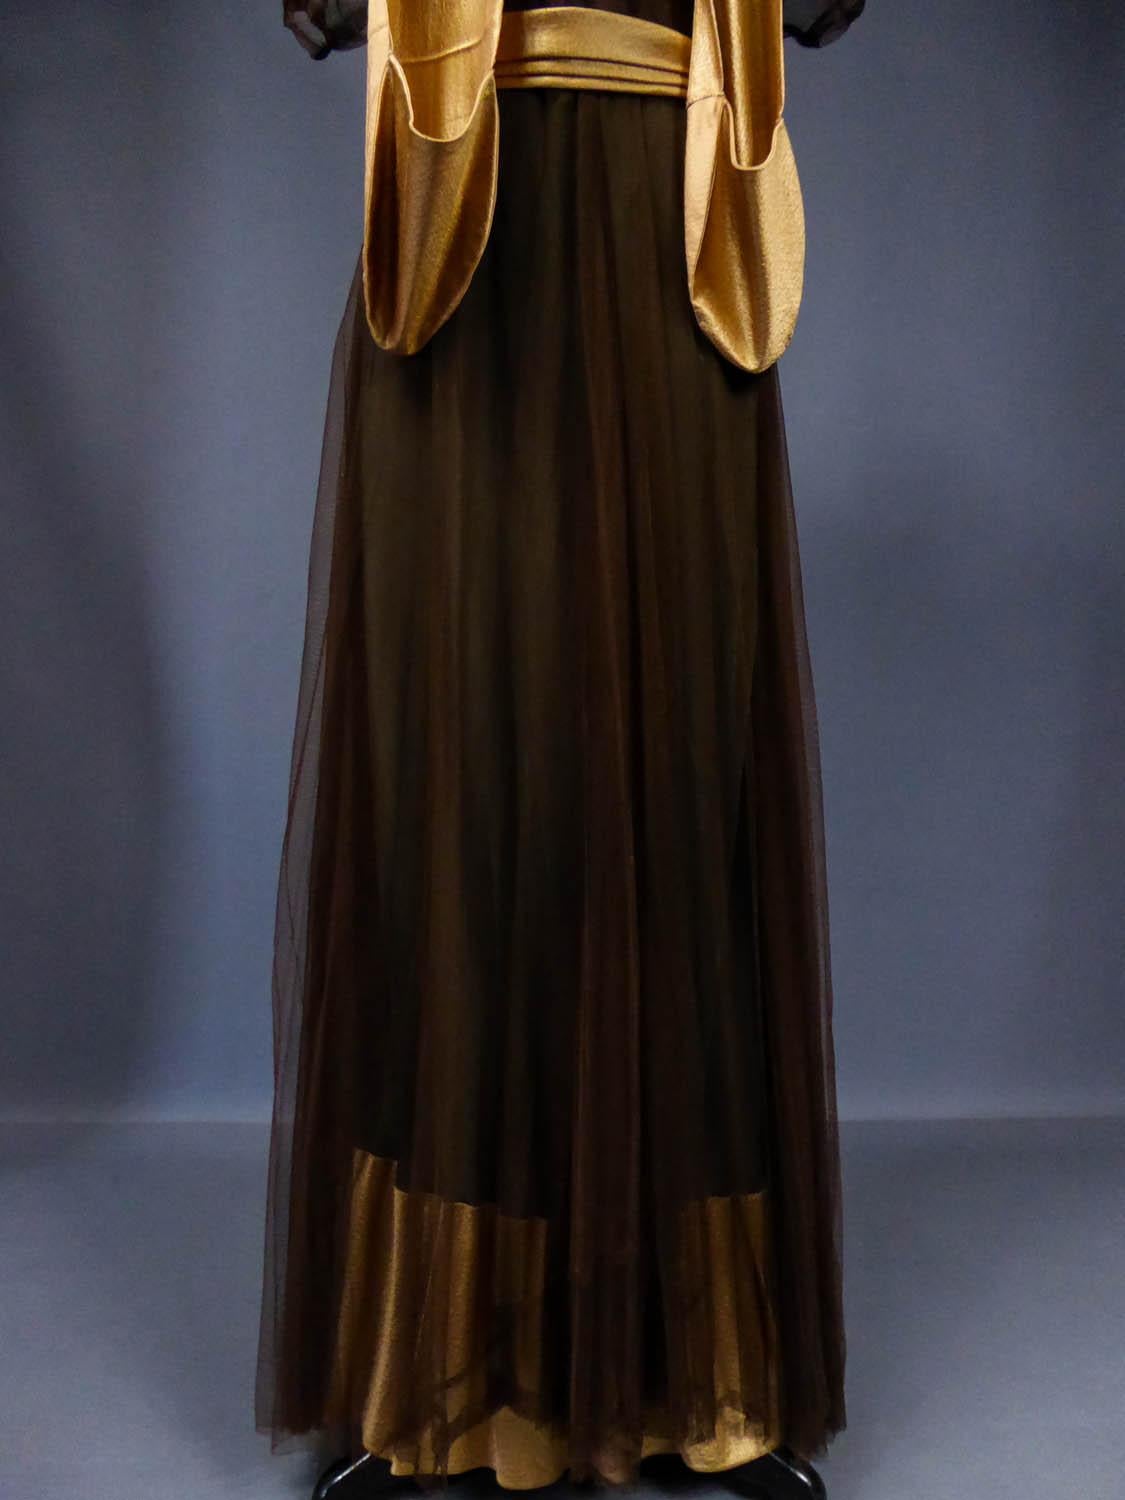 Women's French Evening Dress in Tulle net and Goffered Satin Silk Circa 1930/1940 For Sale